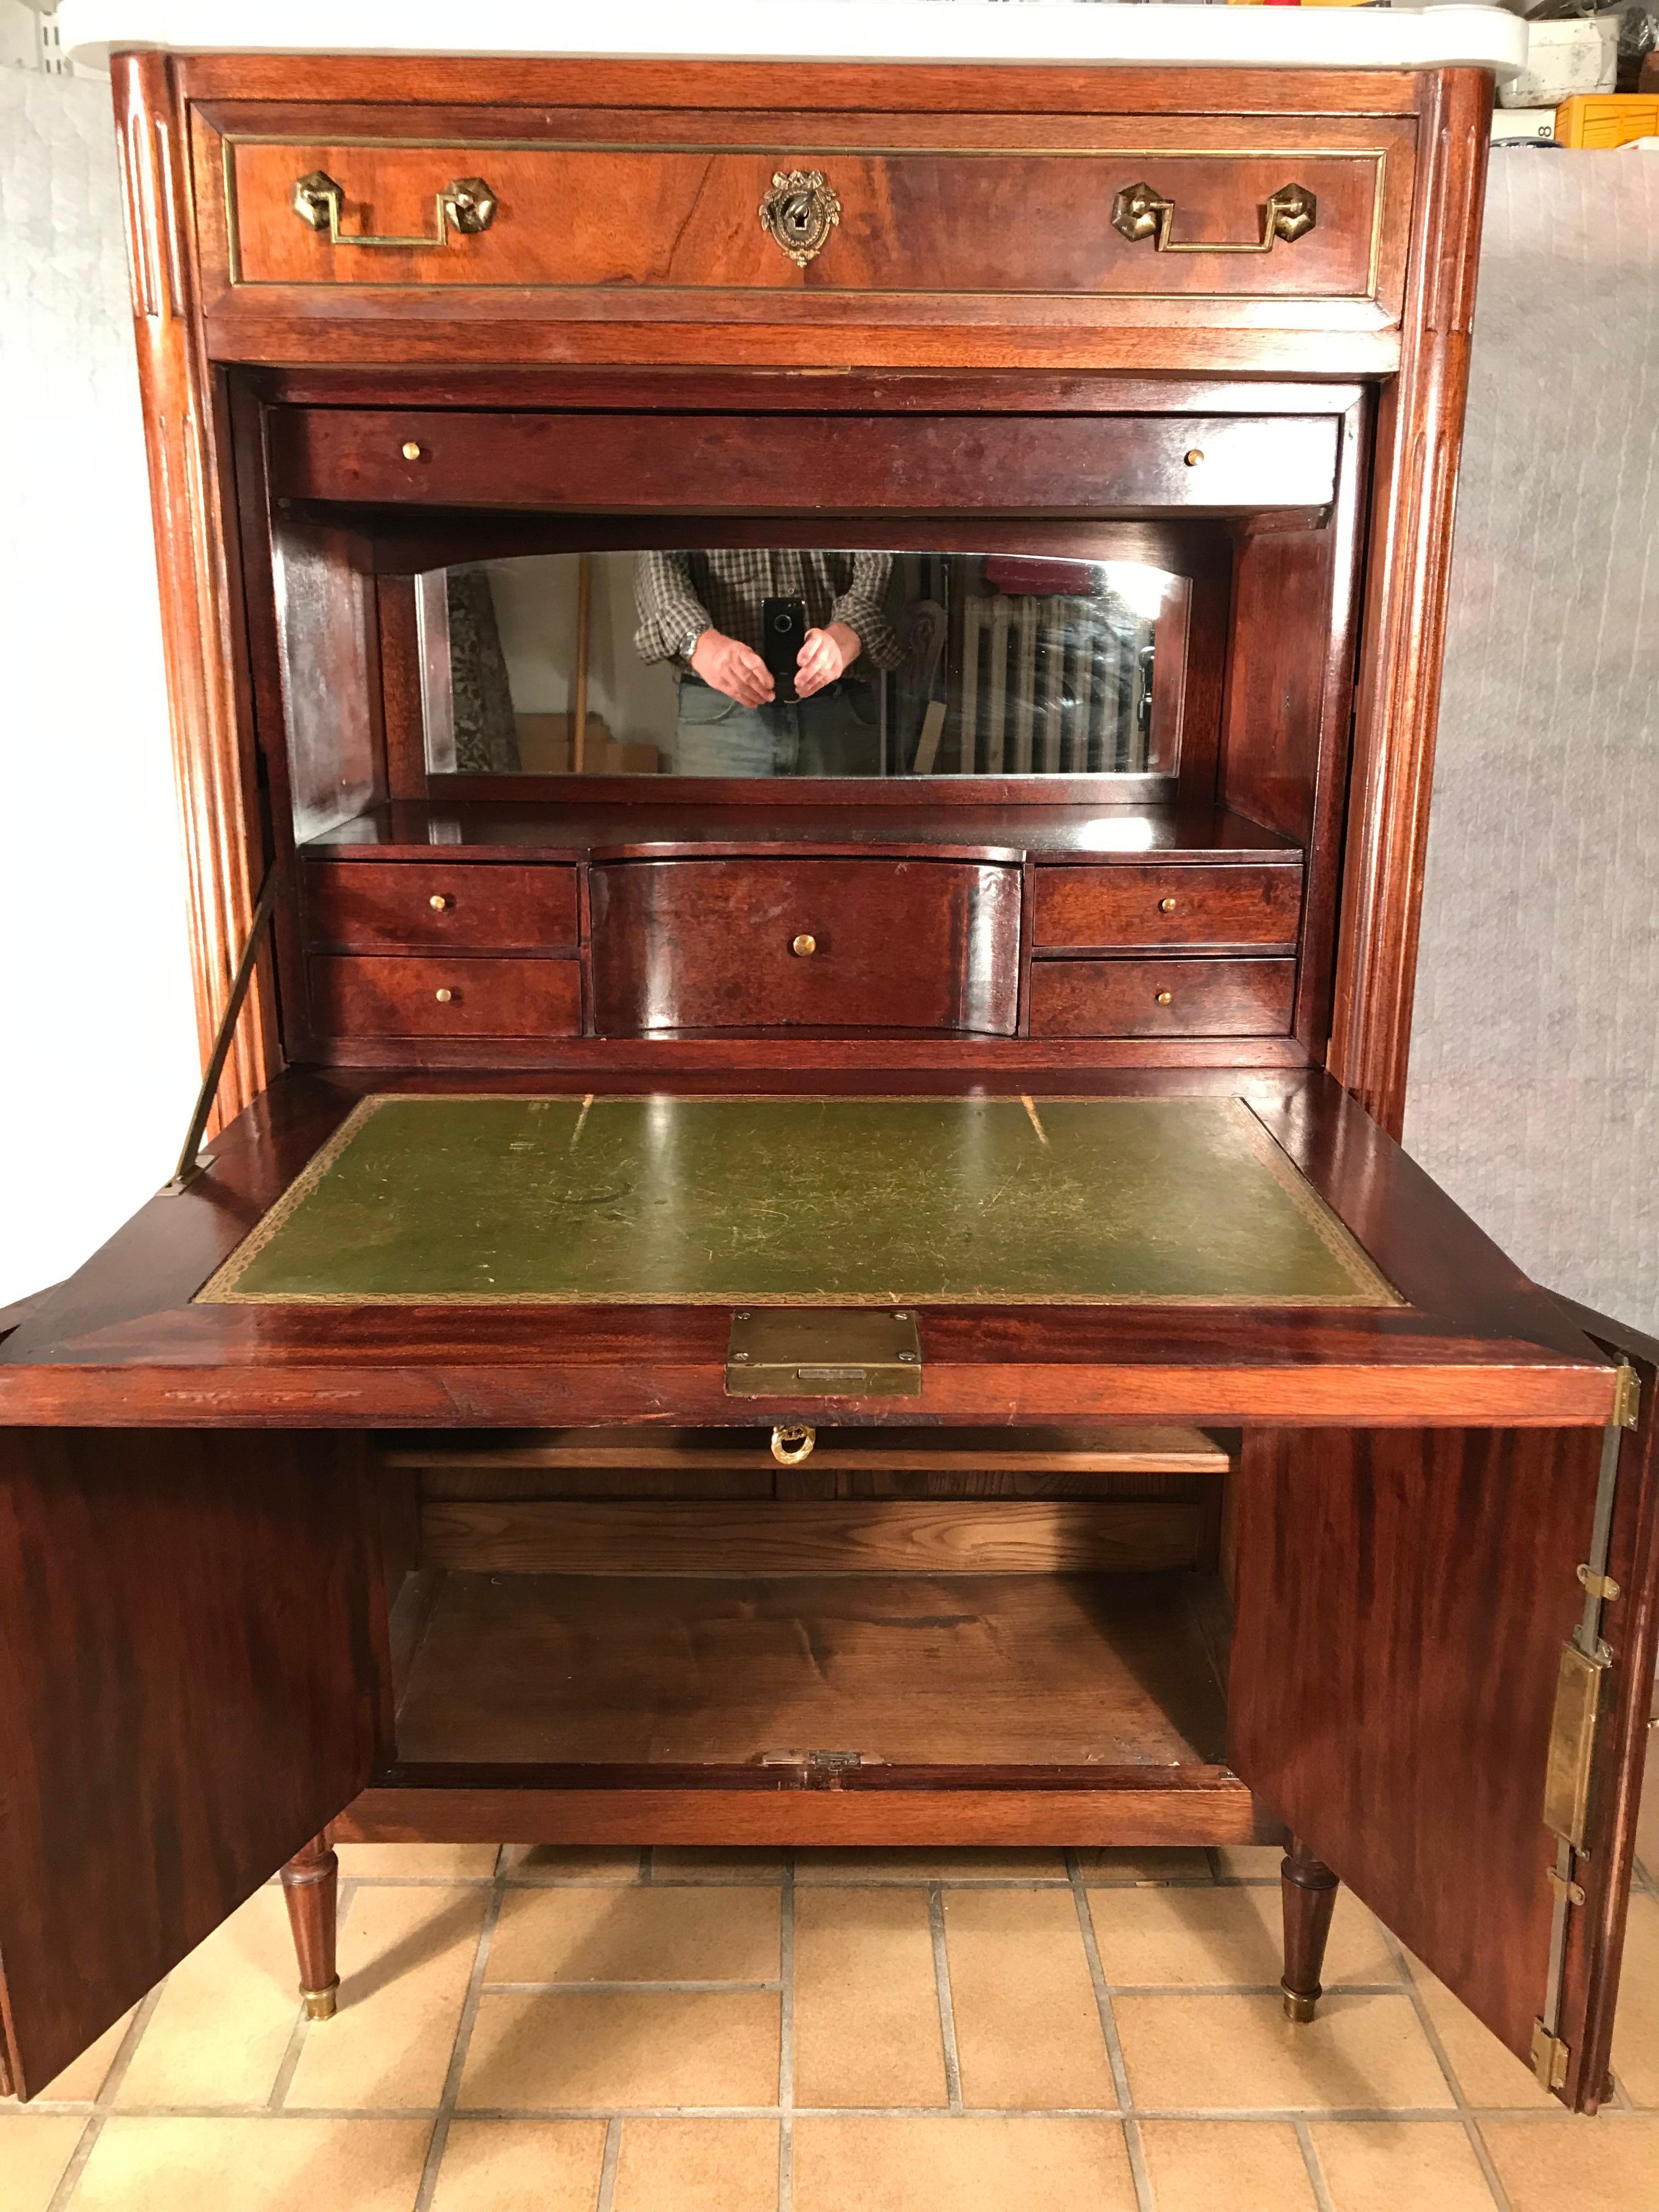 Louis XVI style fall top secretaire, France second half of the 19th century, mahogany veneer with white marble top. In very good condition. The secretaire will be shipped from Germany, shipping costs to Boston are included.